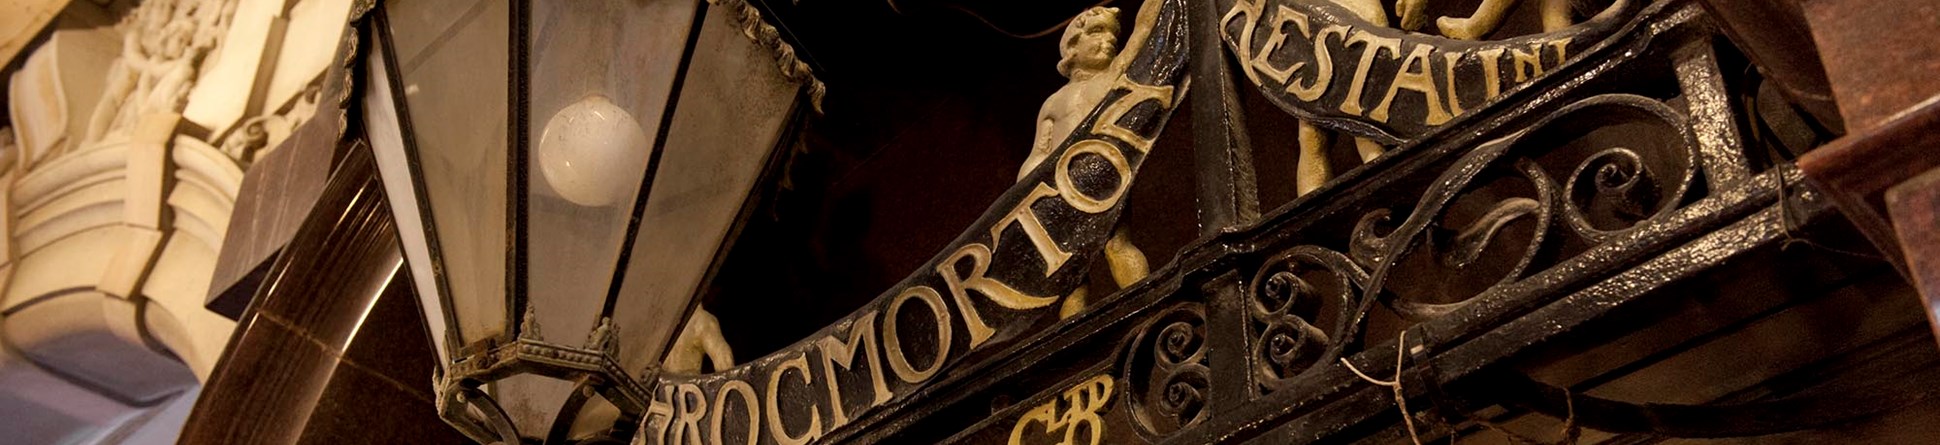 Detail of the signage for J Lyon's Throgmorton Restaurant and street lamp